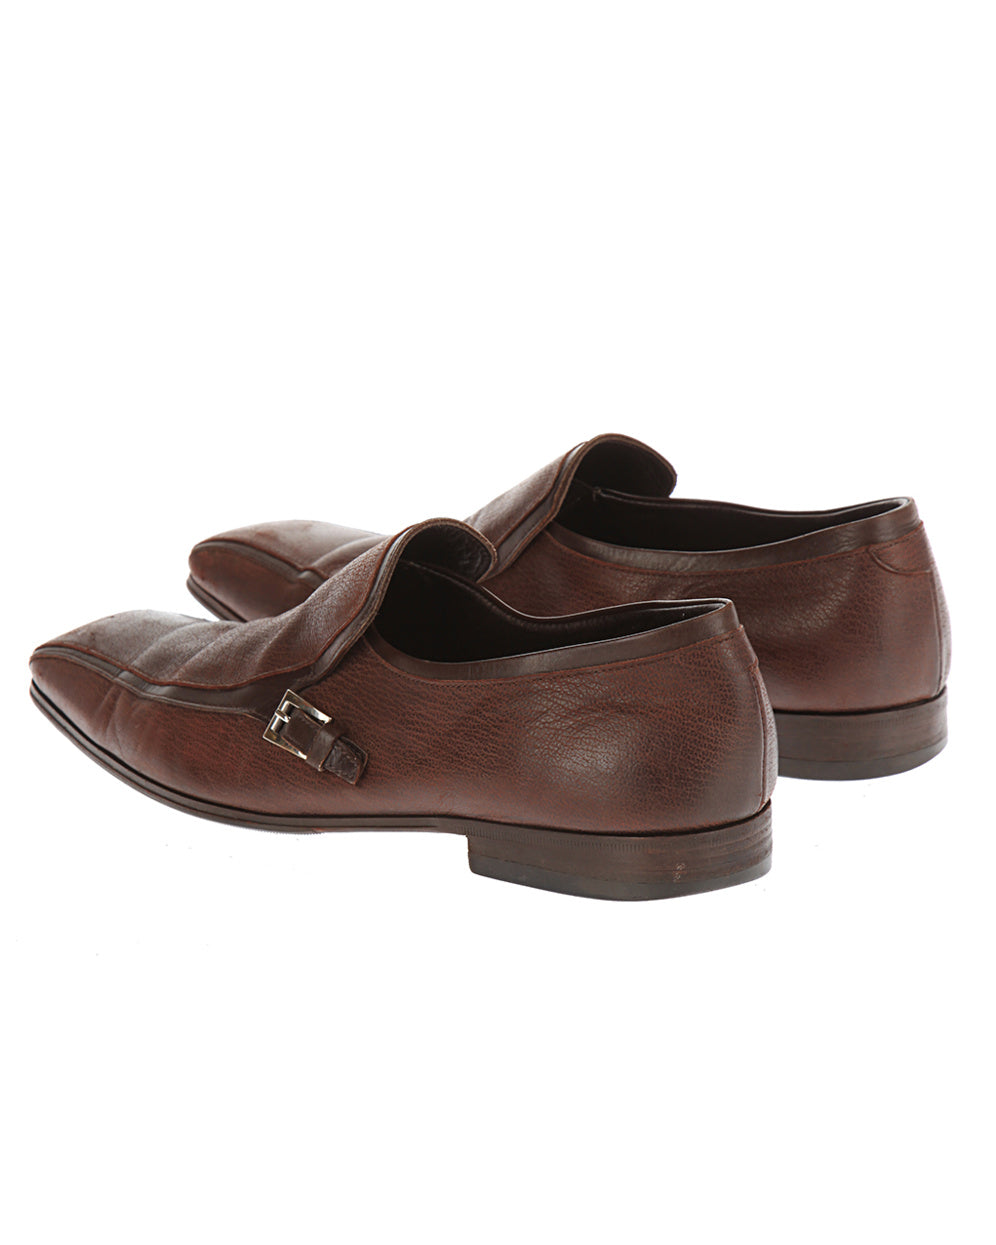 Prada Brown Leather Loafers - UK 6.5